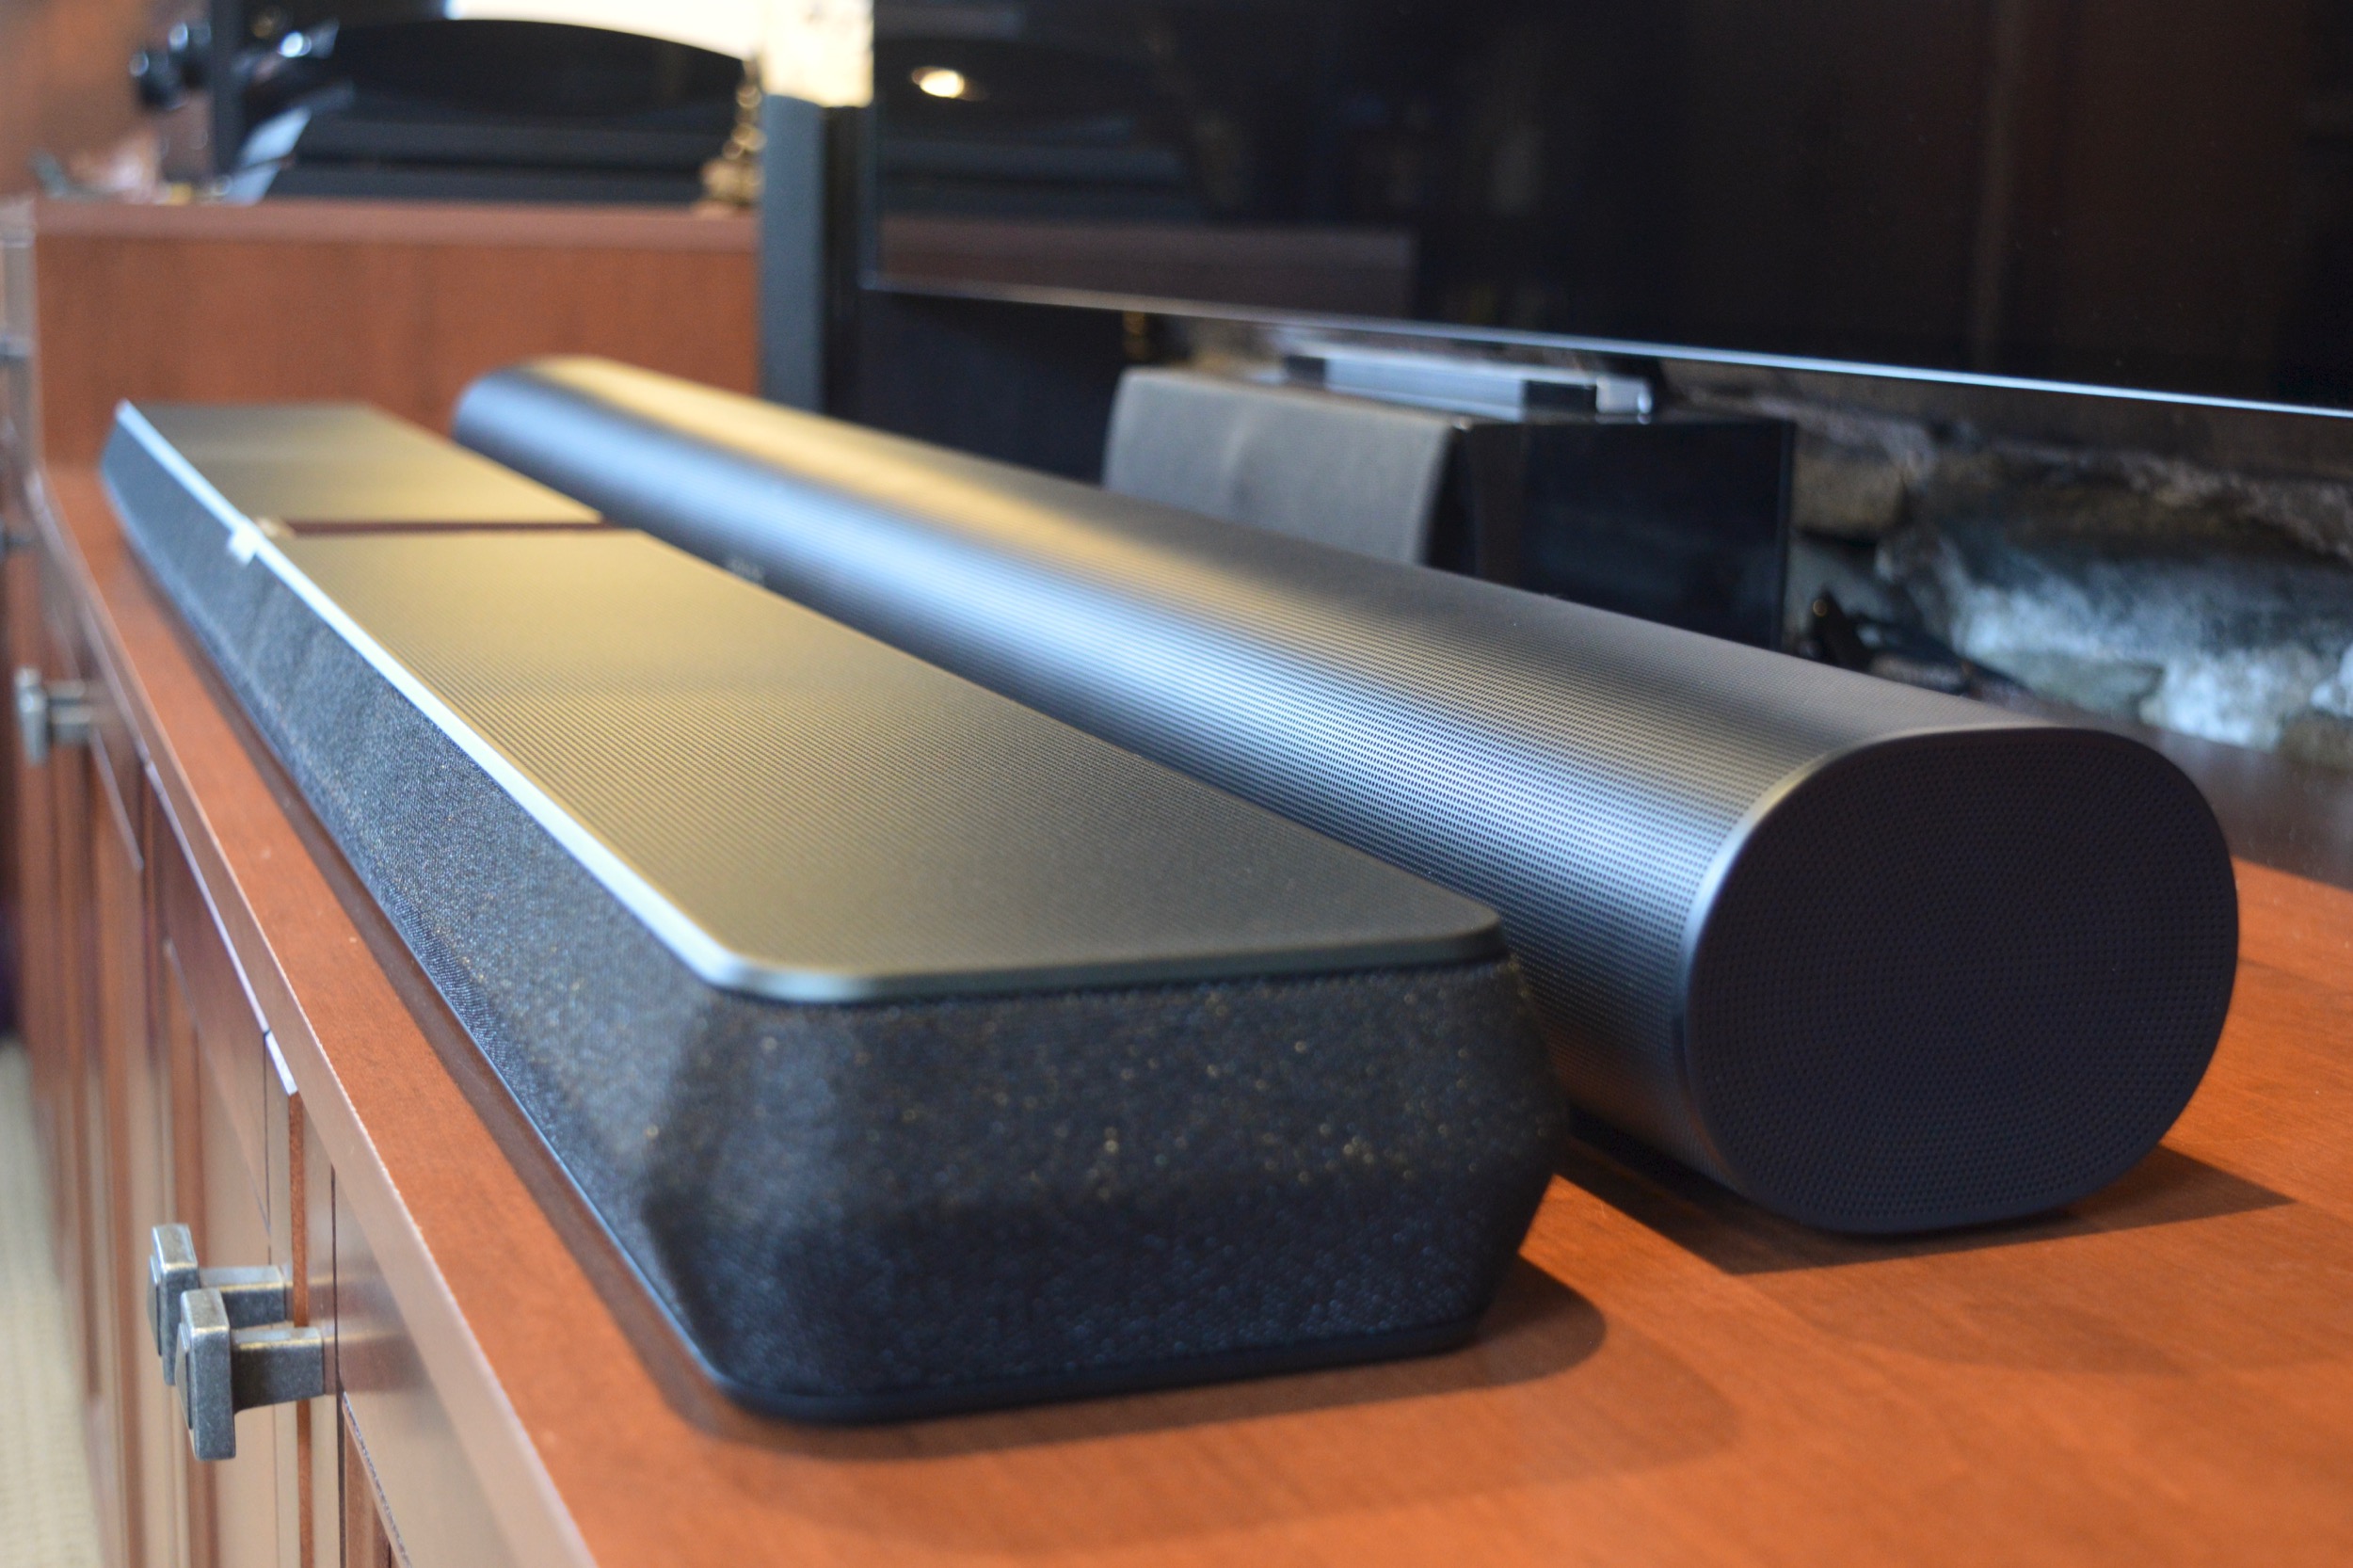 Bowers & Wilkins Panorama 3 review: Home theater power bar